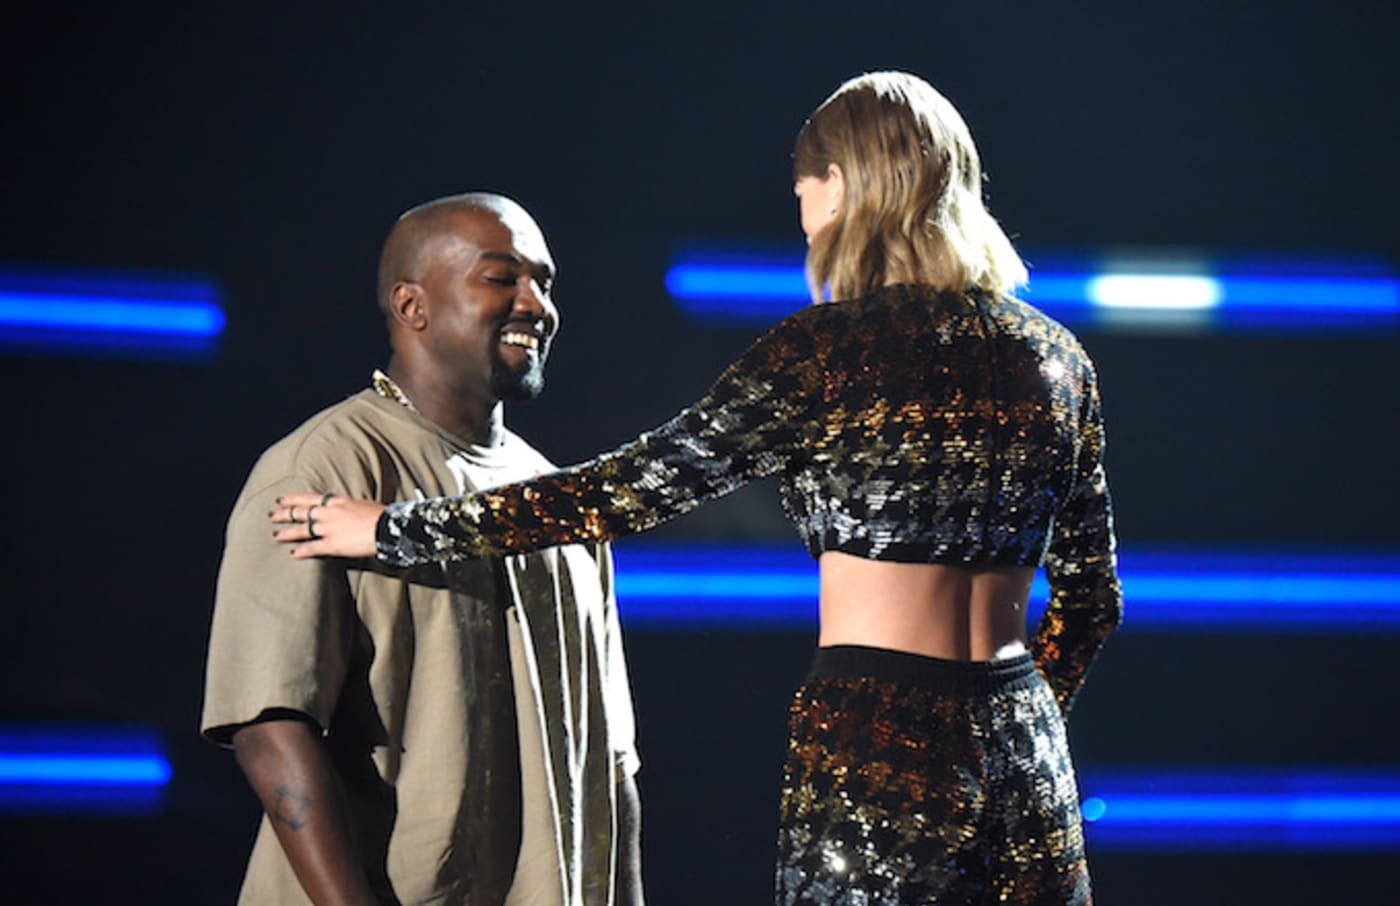 Kanye West and Taylor Swift greet one another.